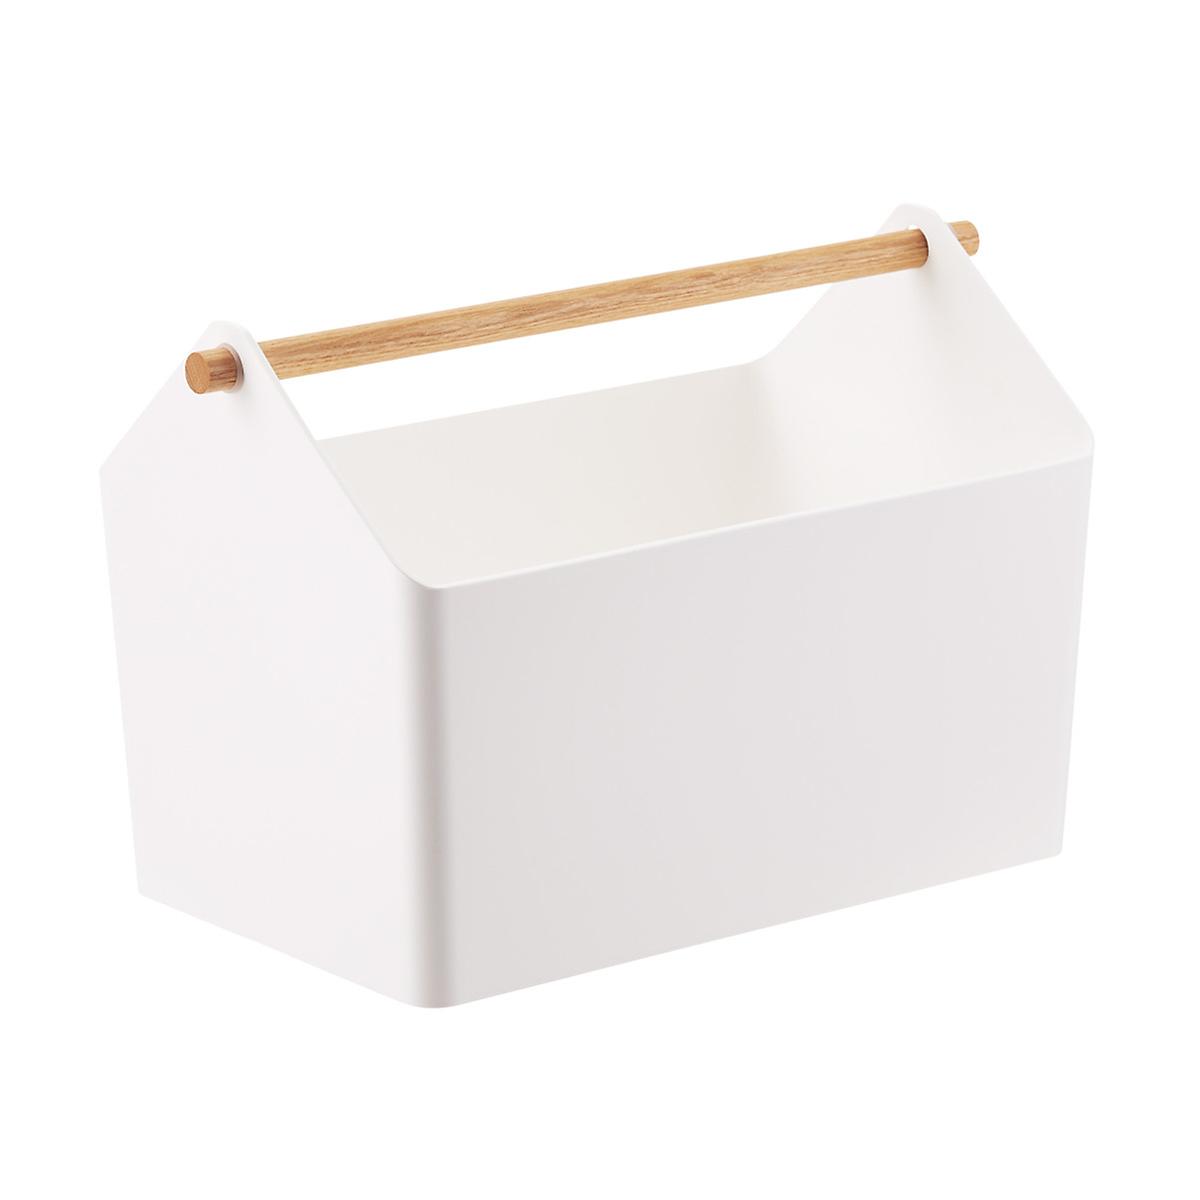 https://images.containerstore.com/catalogimages/360414/10077363-Favori-storage-box-white-na.jpg?width=1200&height=1200&align=center